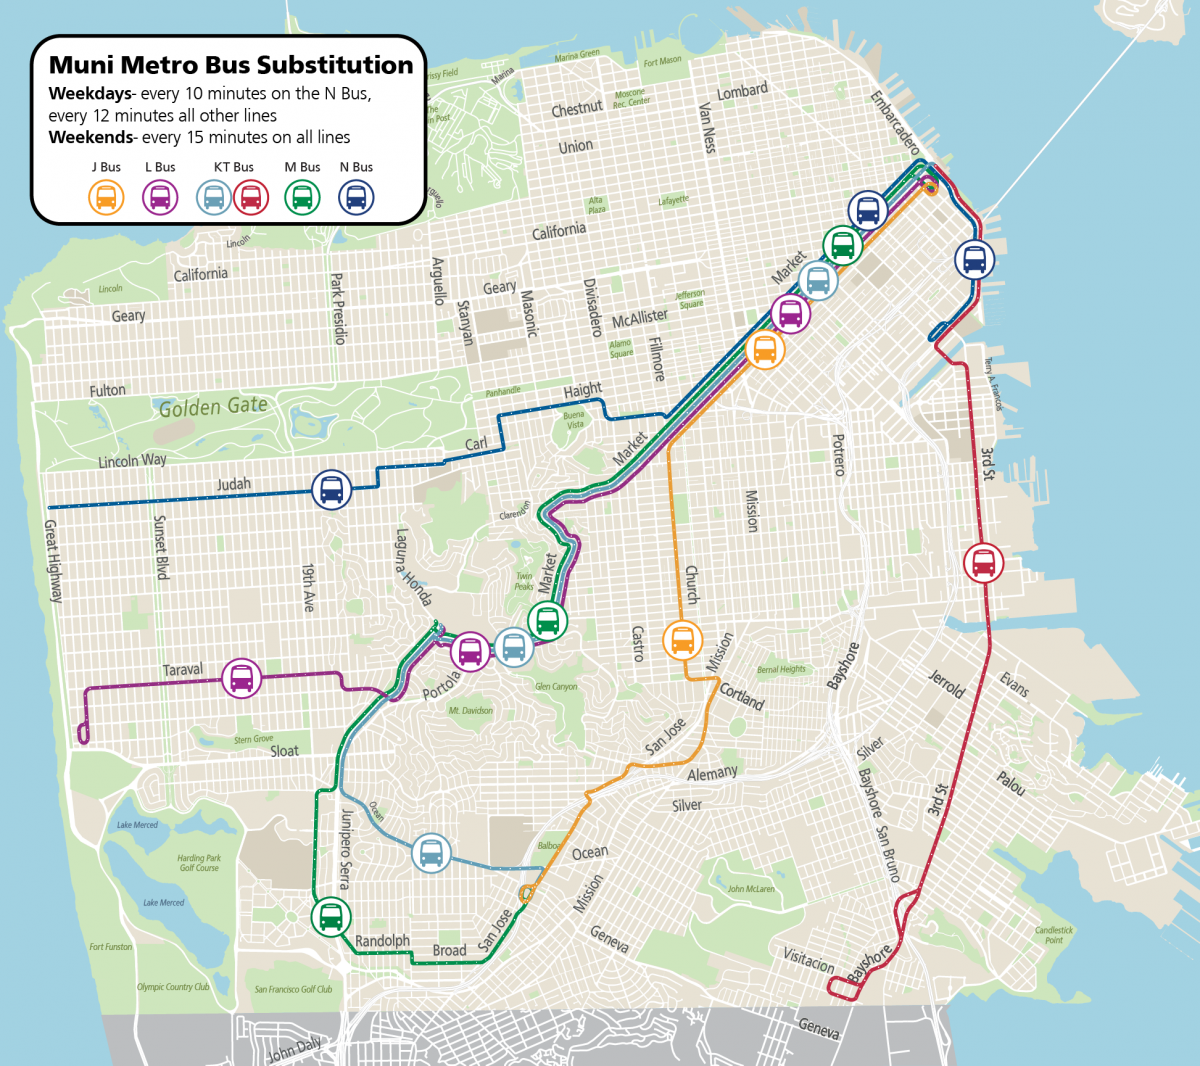 Map showing bus shuttle substitutions for all Muni Metro routes. Muni Metro Bus Substitution. Weekdays - every 10 minutes on the N Bus, every 12 minutes all other lines. Weekends - every 15 minutes on all lines.